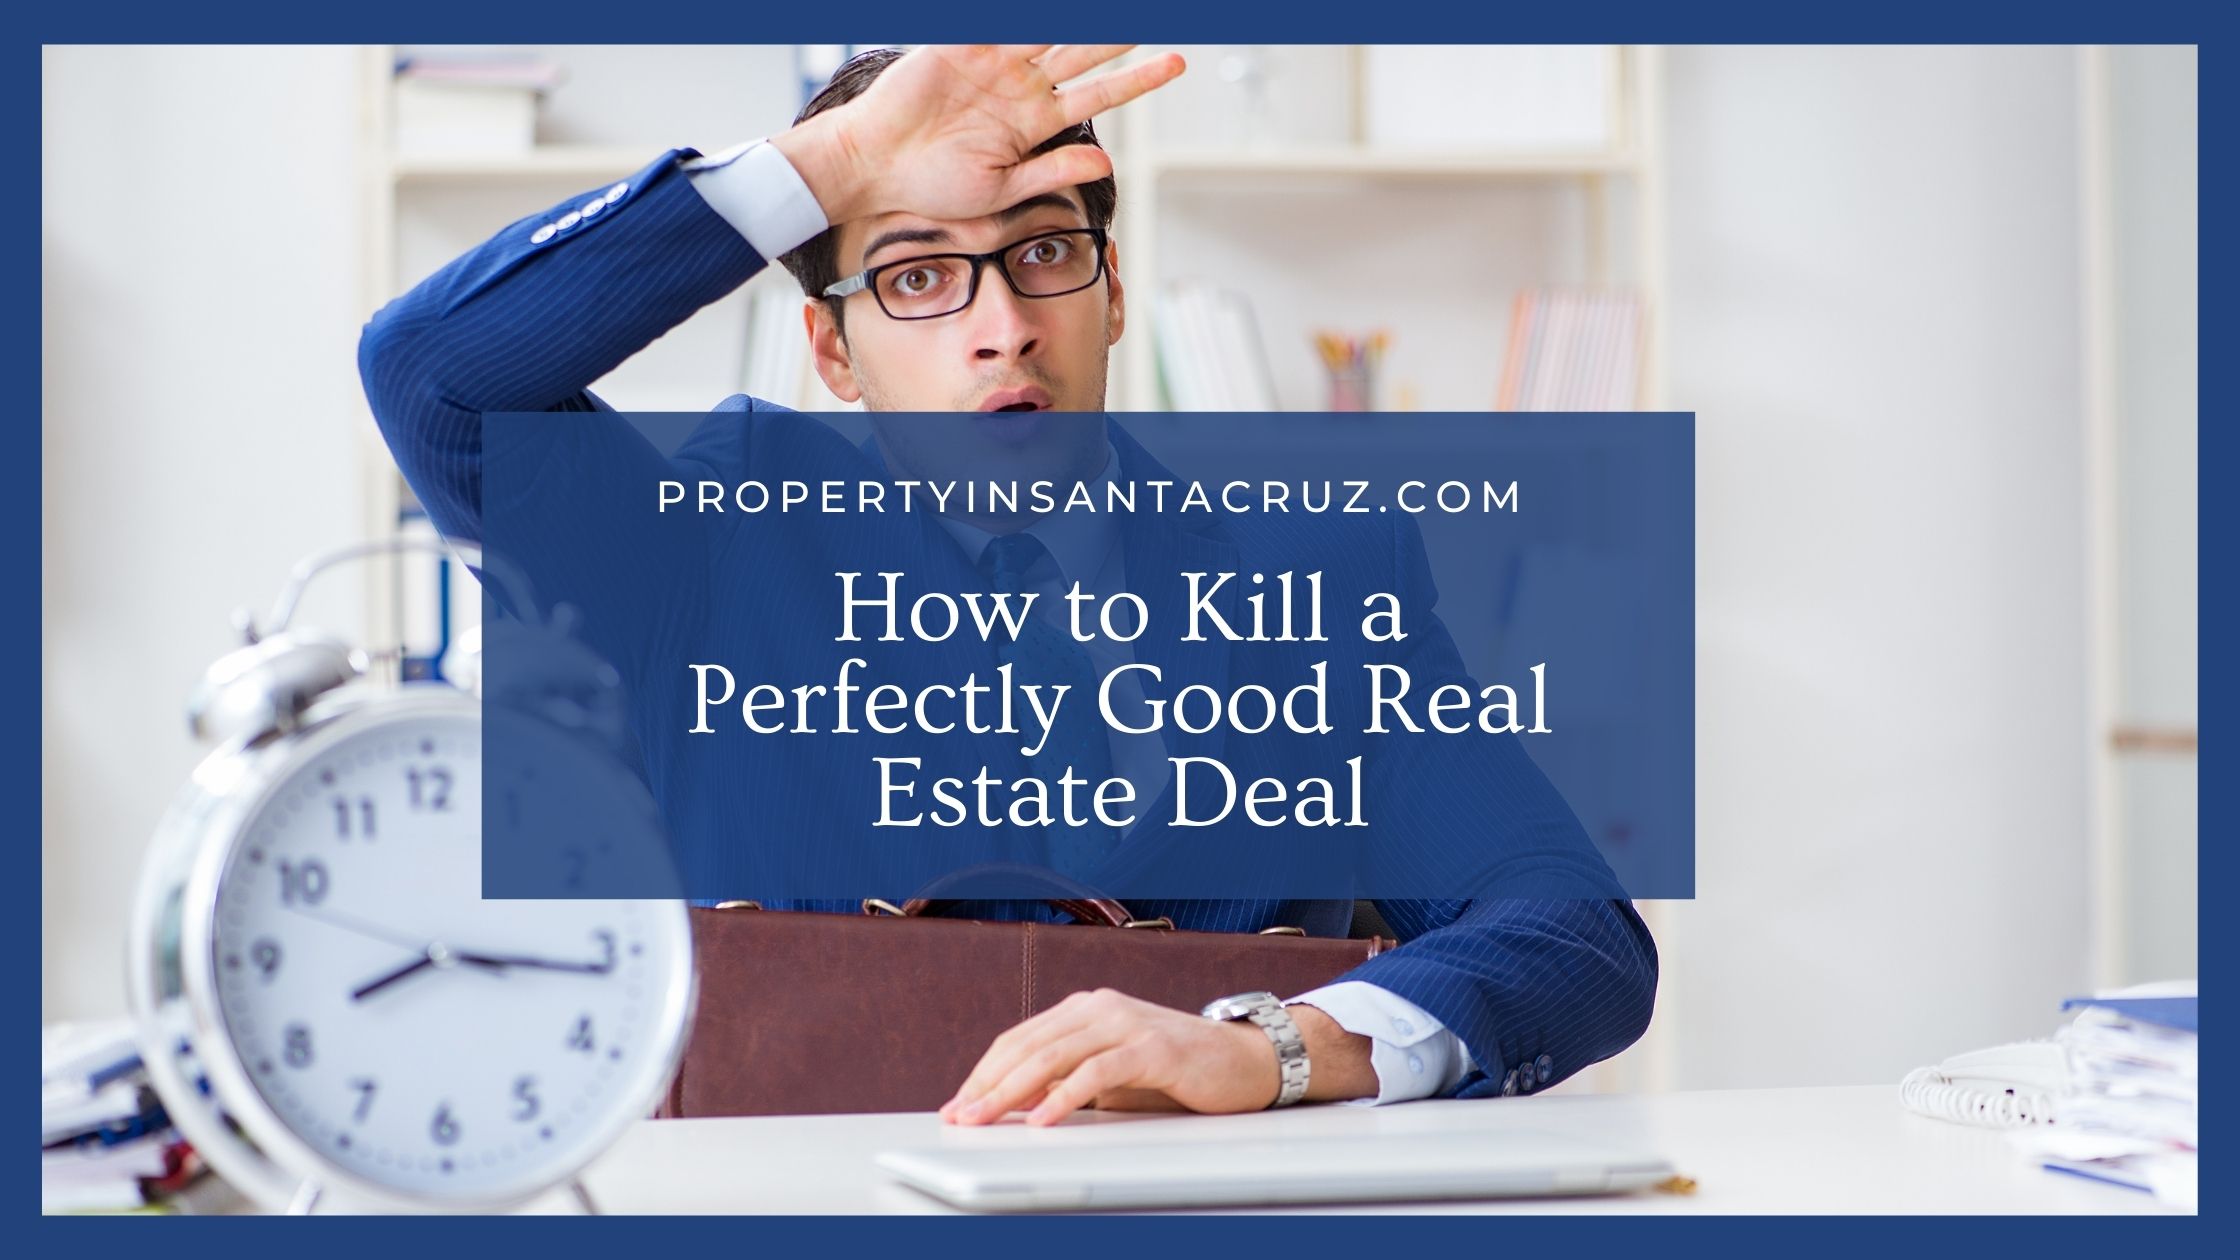 How to Kill a Perfectly Good Real Estate Deal